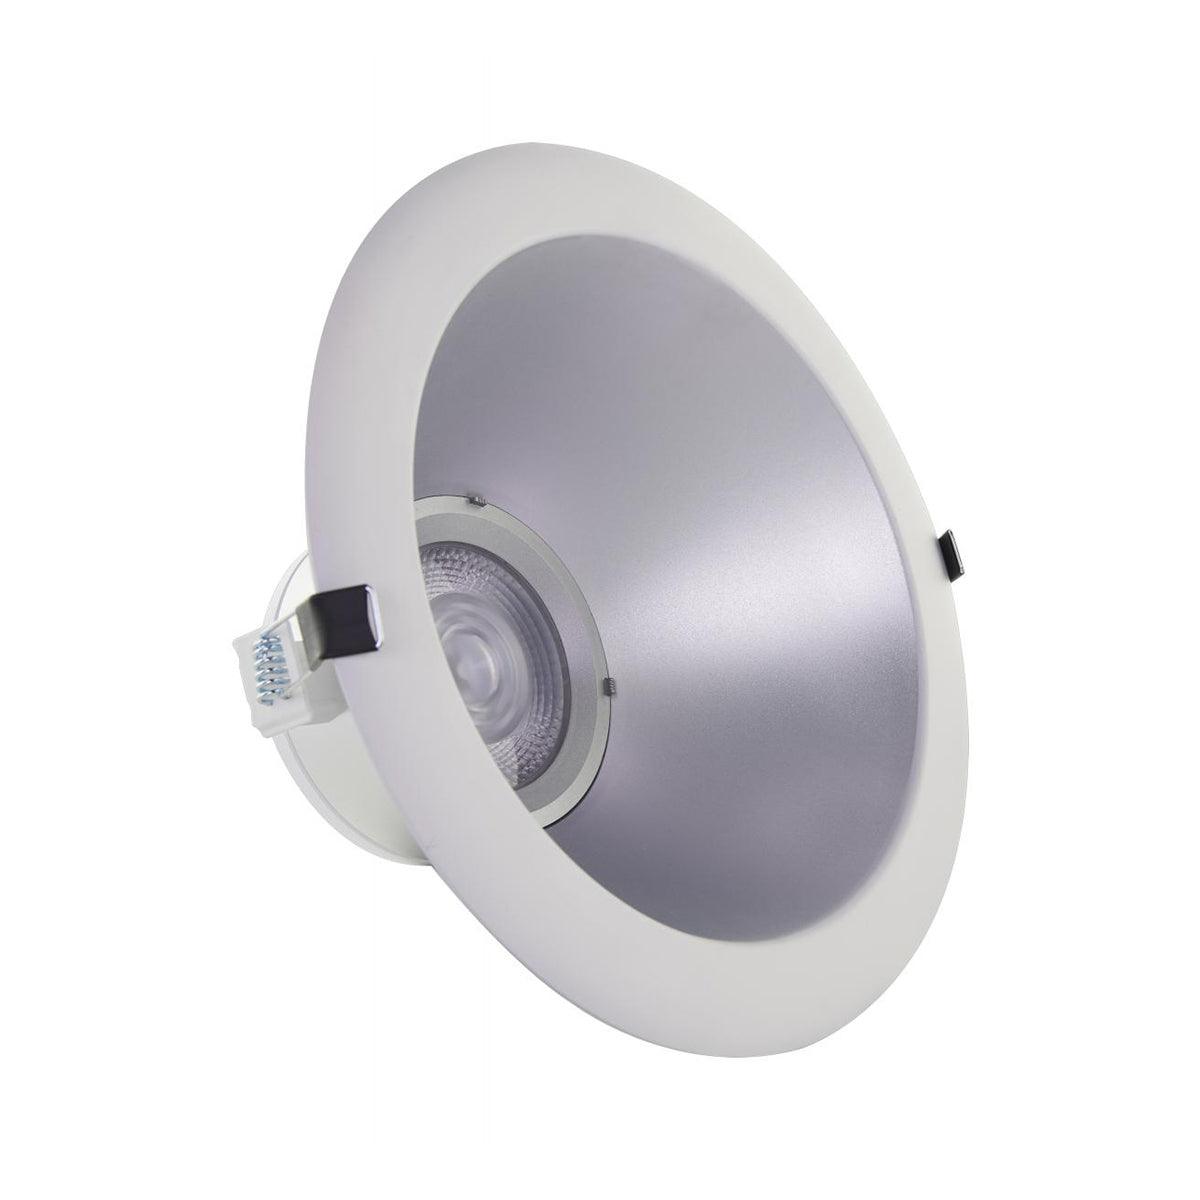 6 In. Commercial Canless LED Recessed Light, 23 Watt, 1750 Lumens, Selectable CCT, 2700K to 5000K, Silver Finish - Bees Lighting